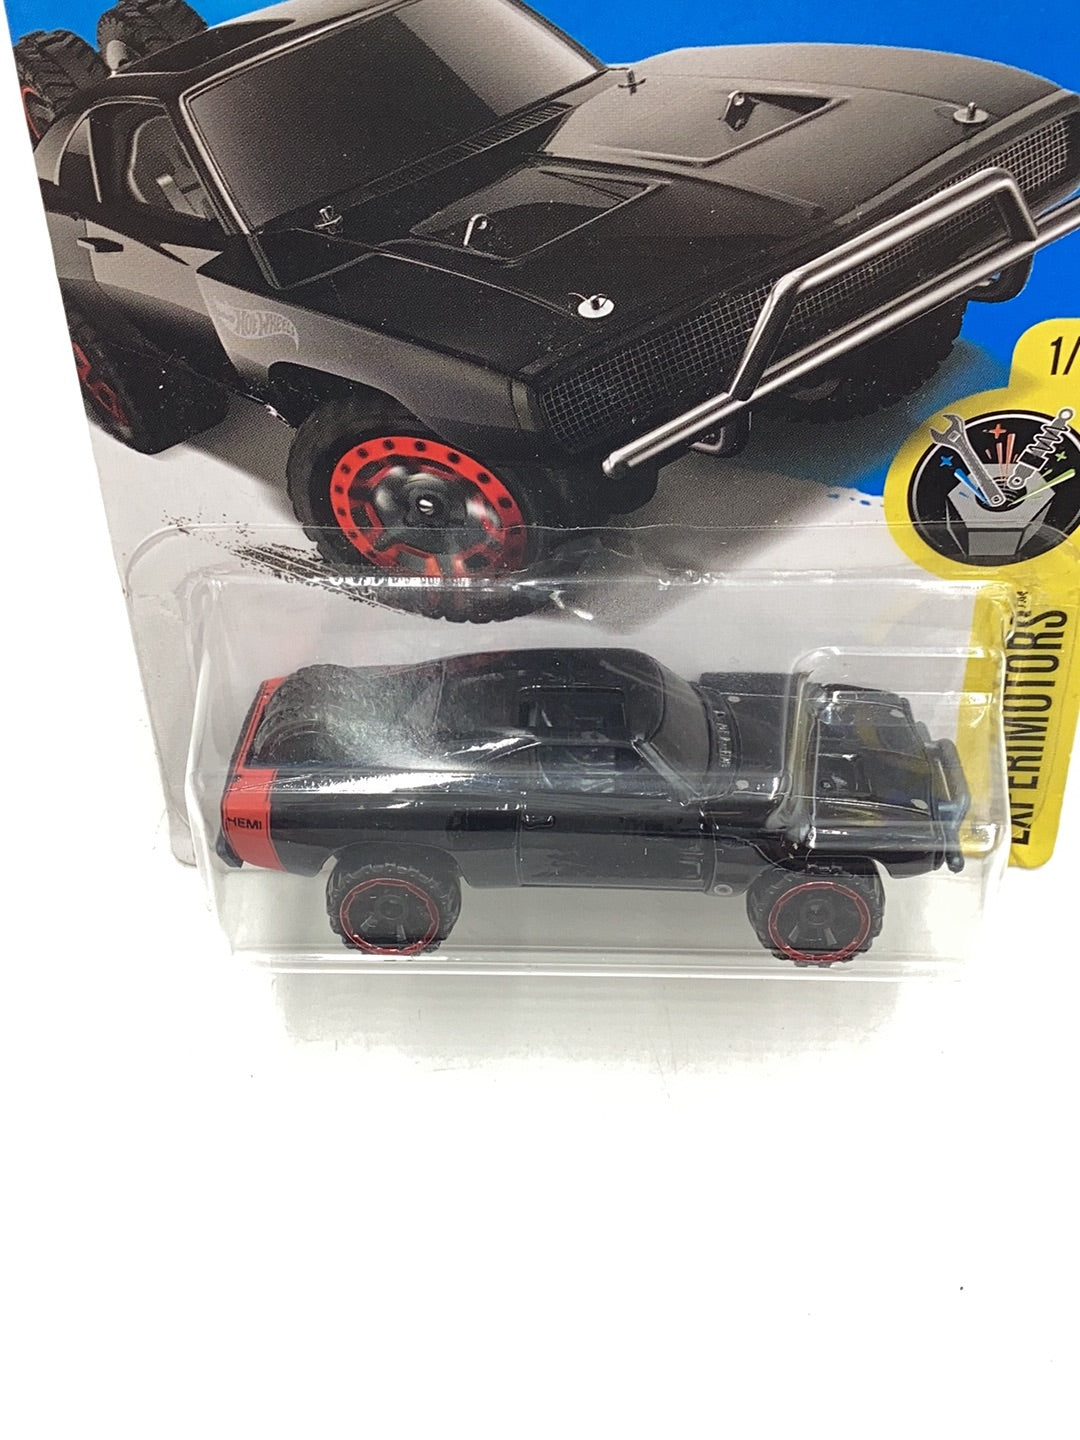 2017 Hot Wheels #4 70 Dodge Charger Fast and Furious 47E